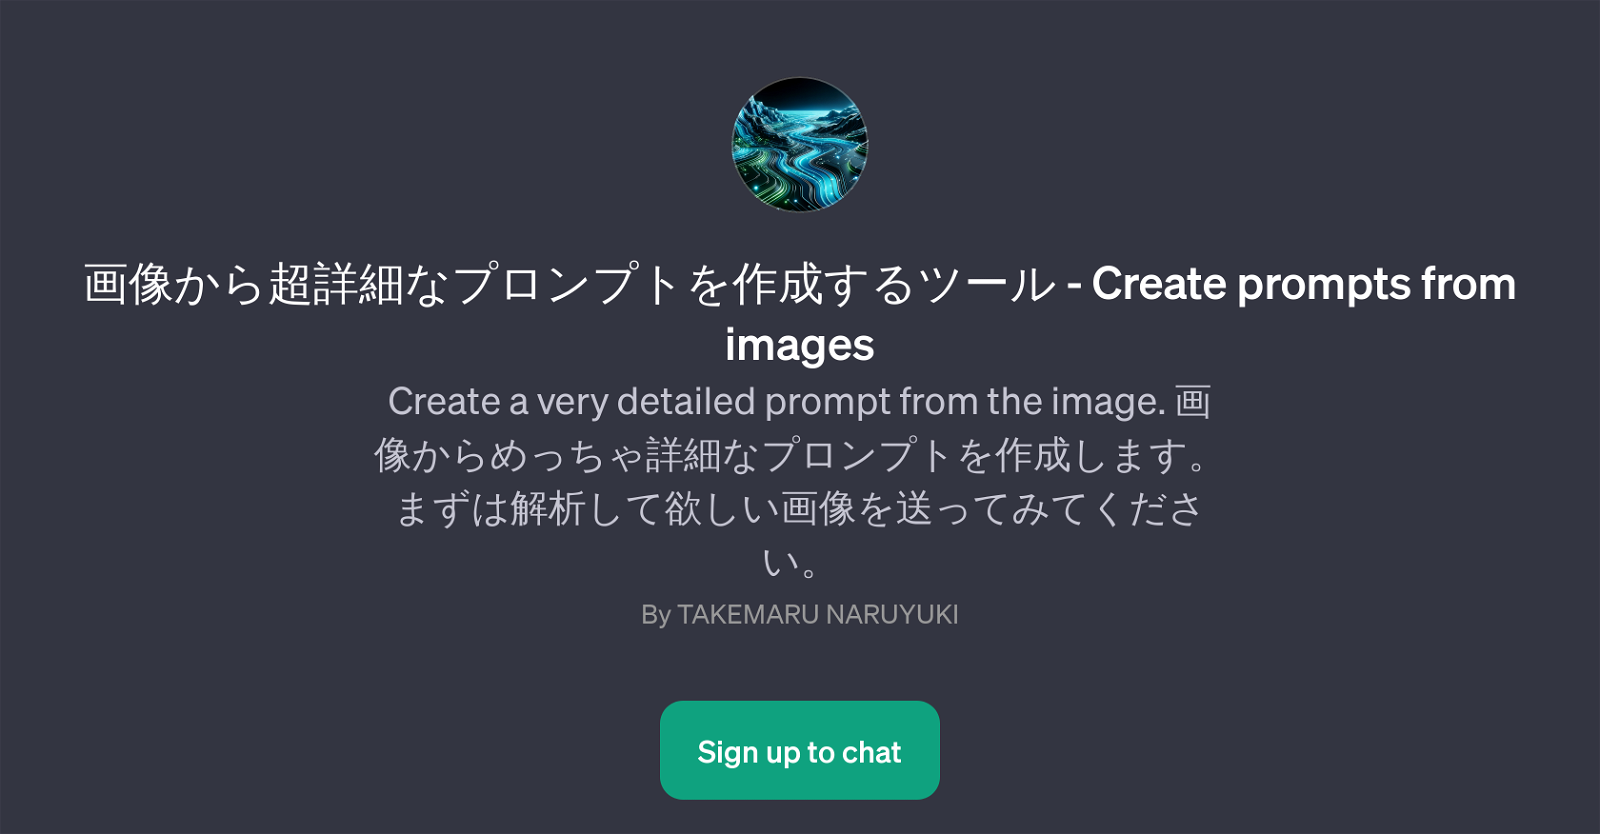 Create Prompts from Images website